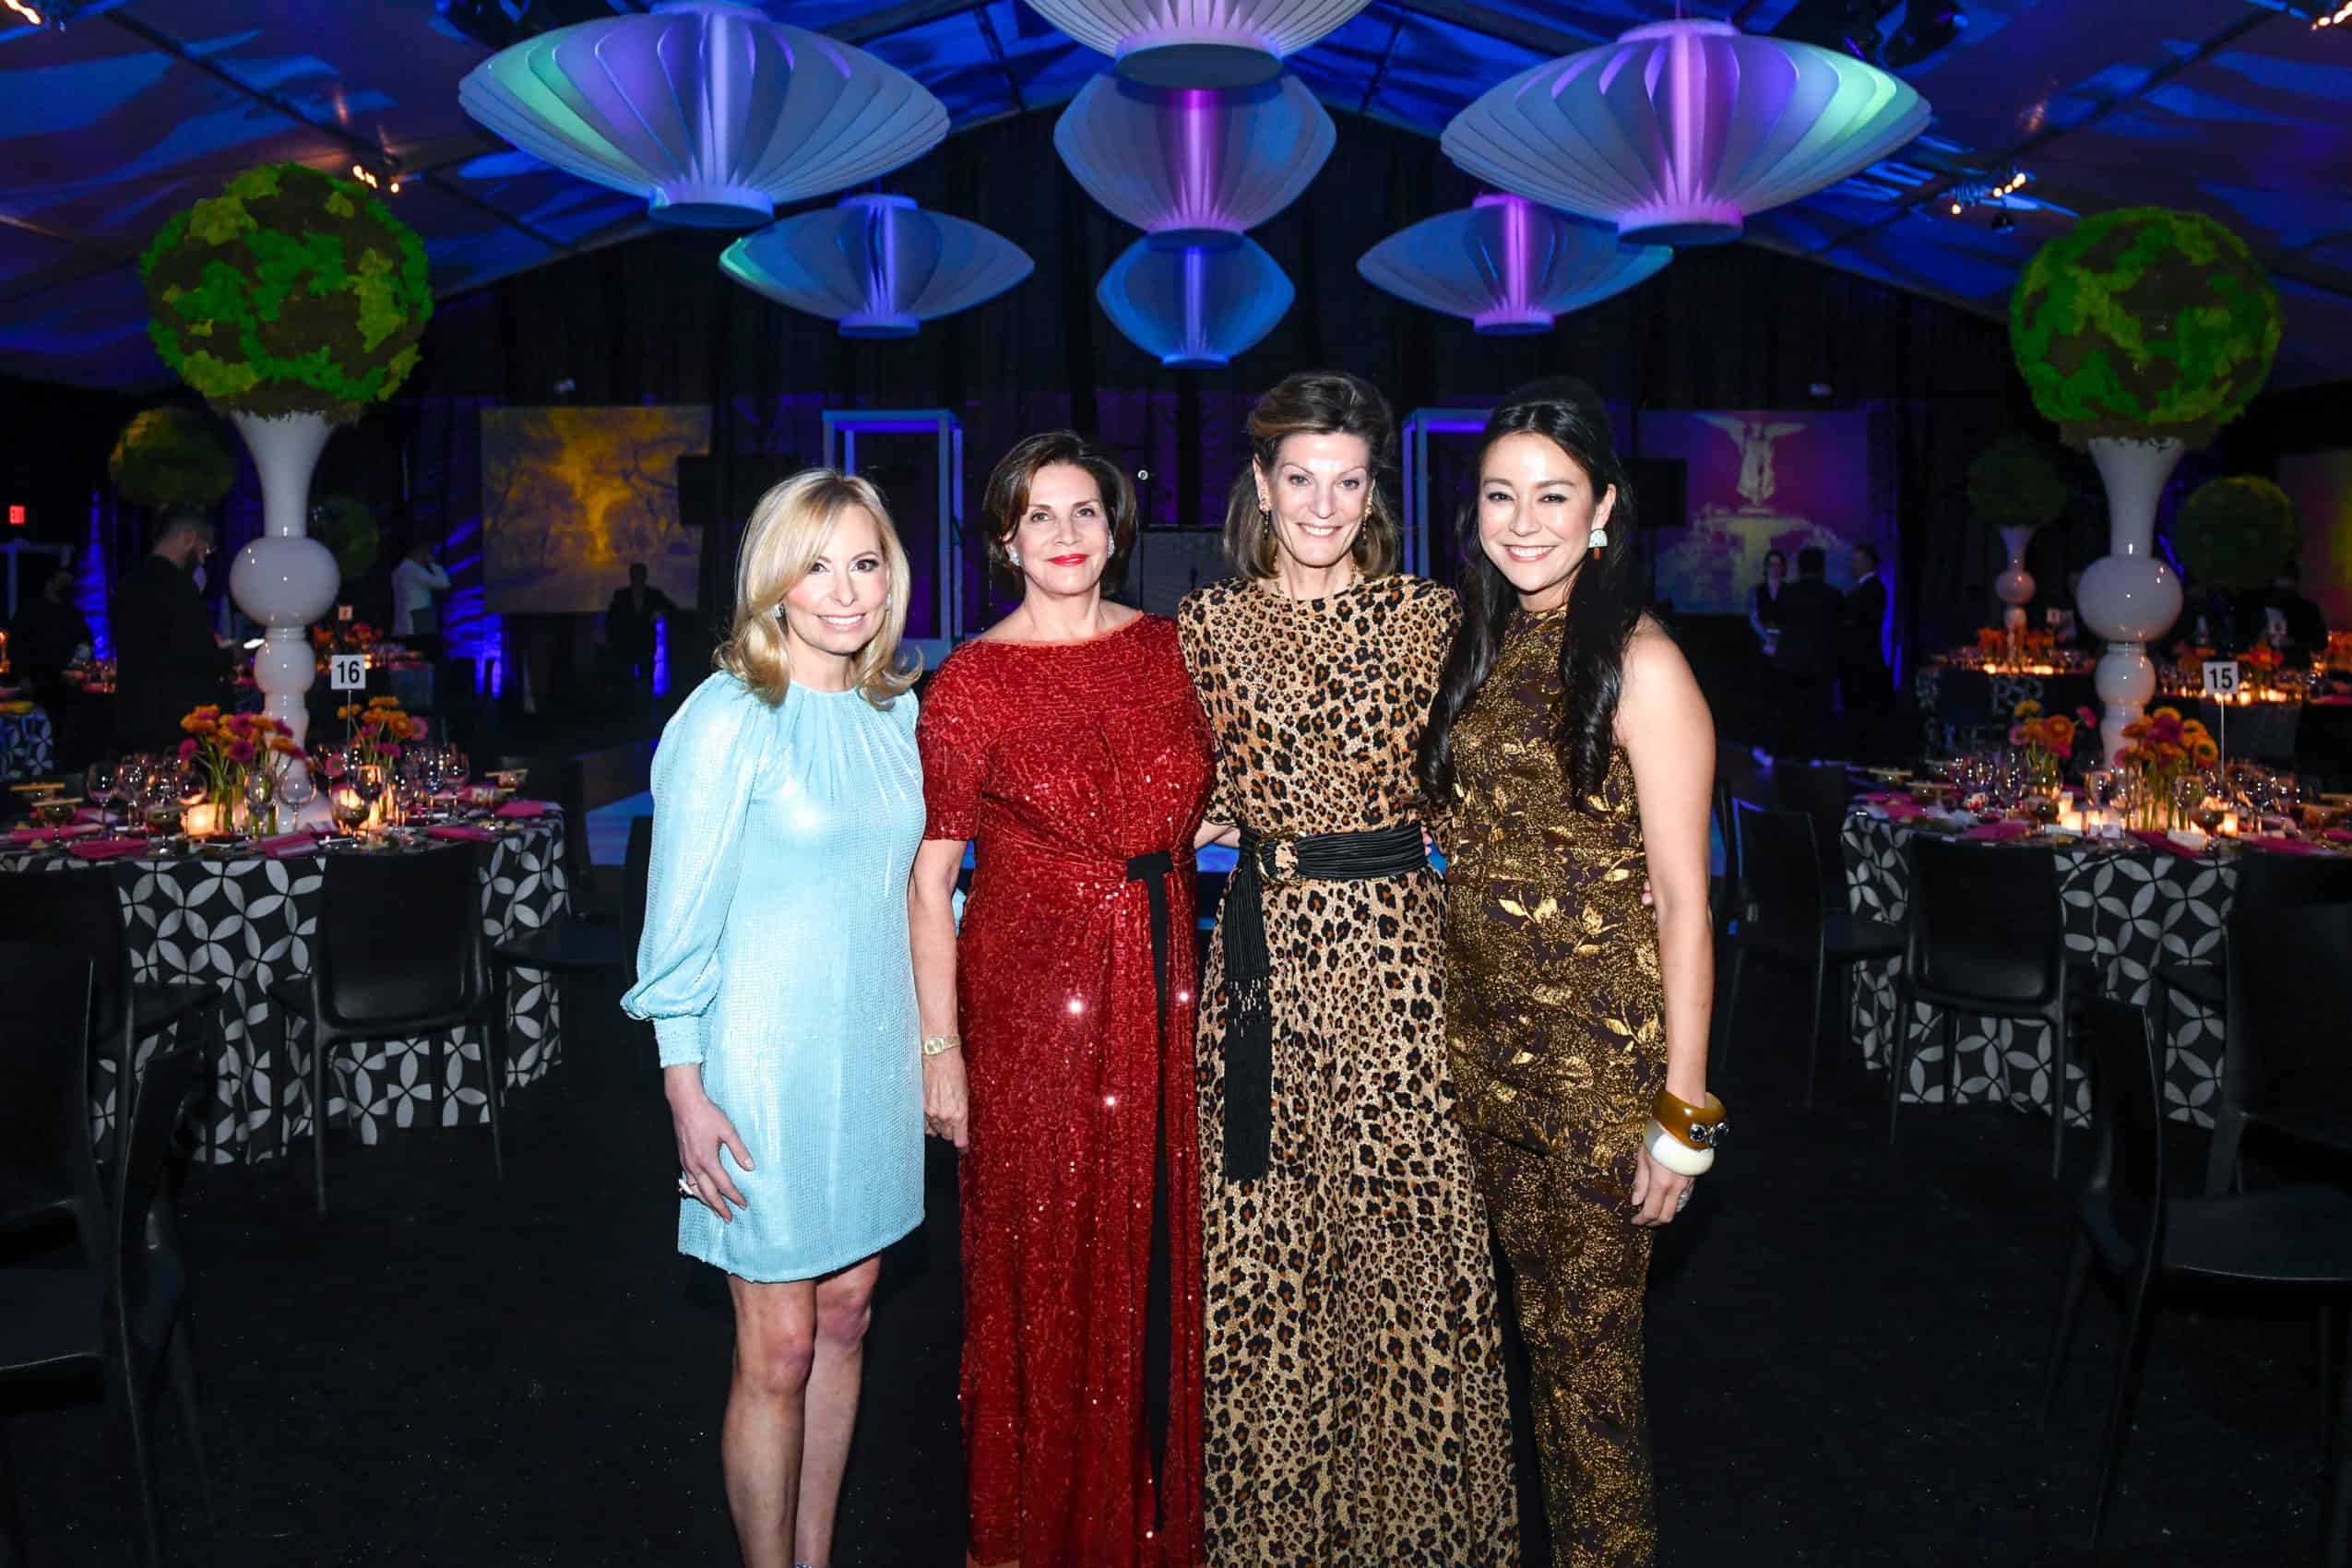 See The Sixties-inspired Style At The Central Park Conservancy ‘MOD’ Gala